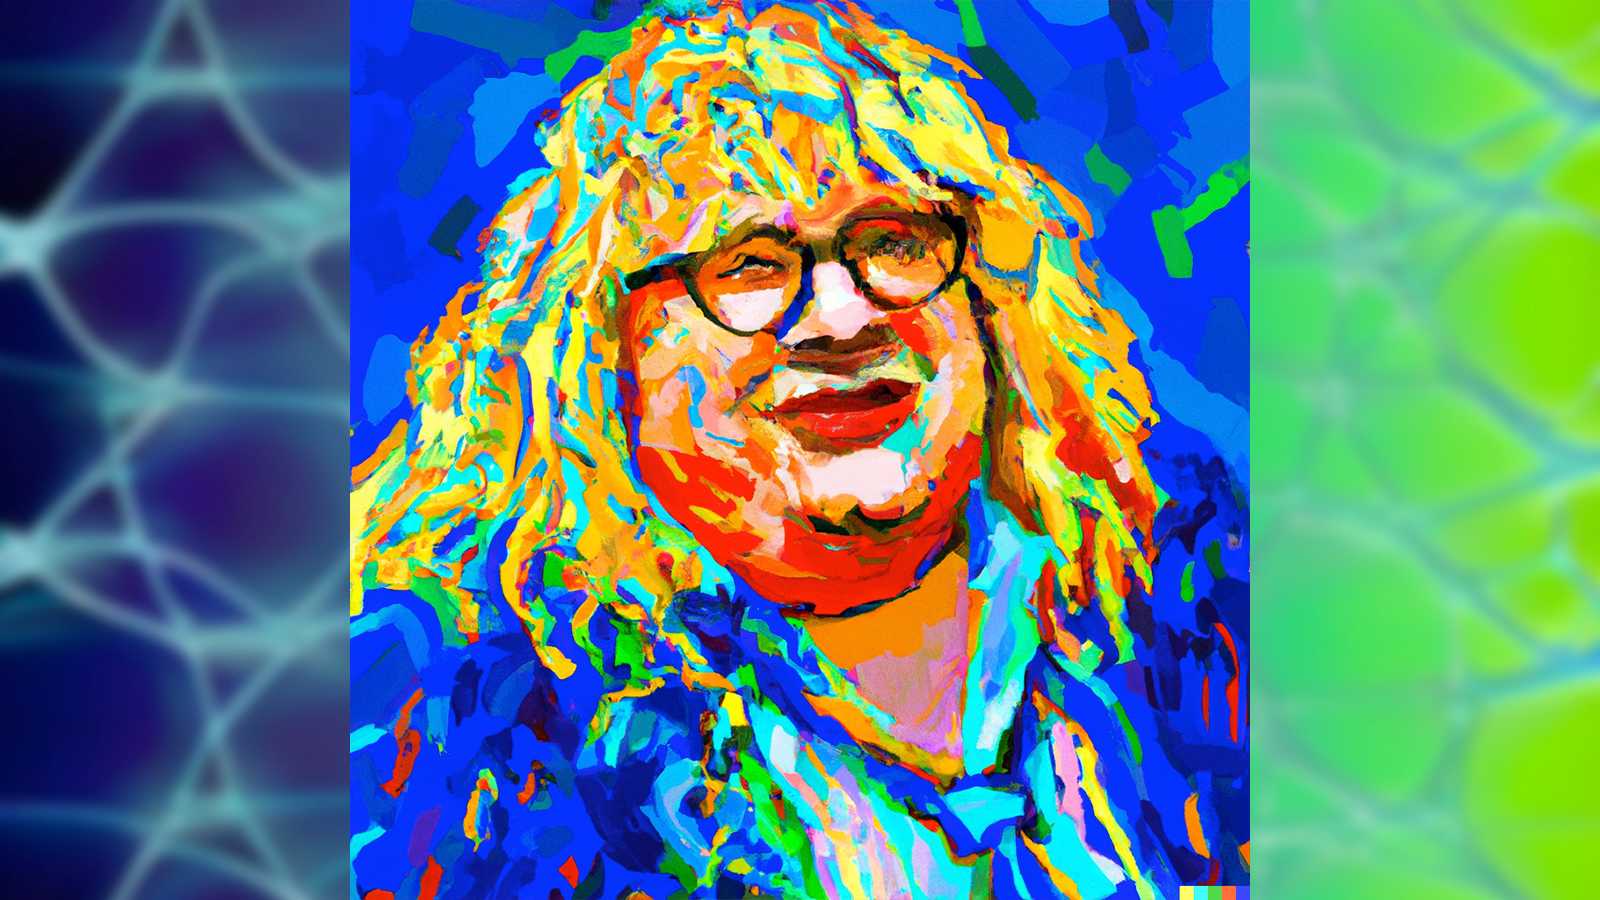 Bruce Vilanch made by DALLE in Monet's style